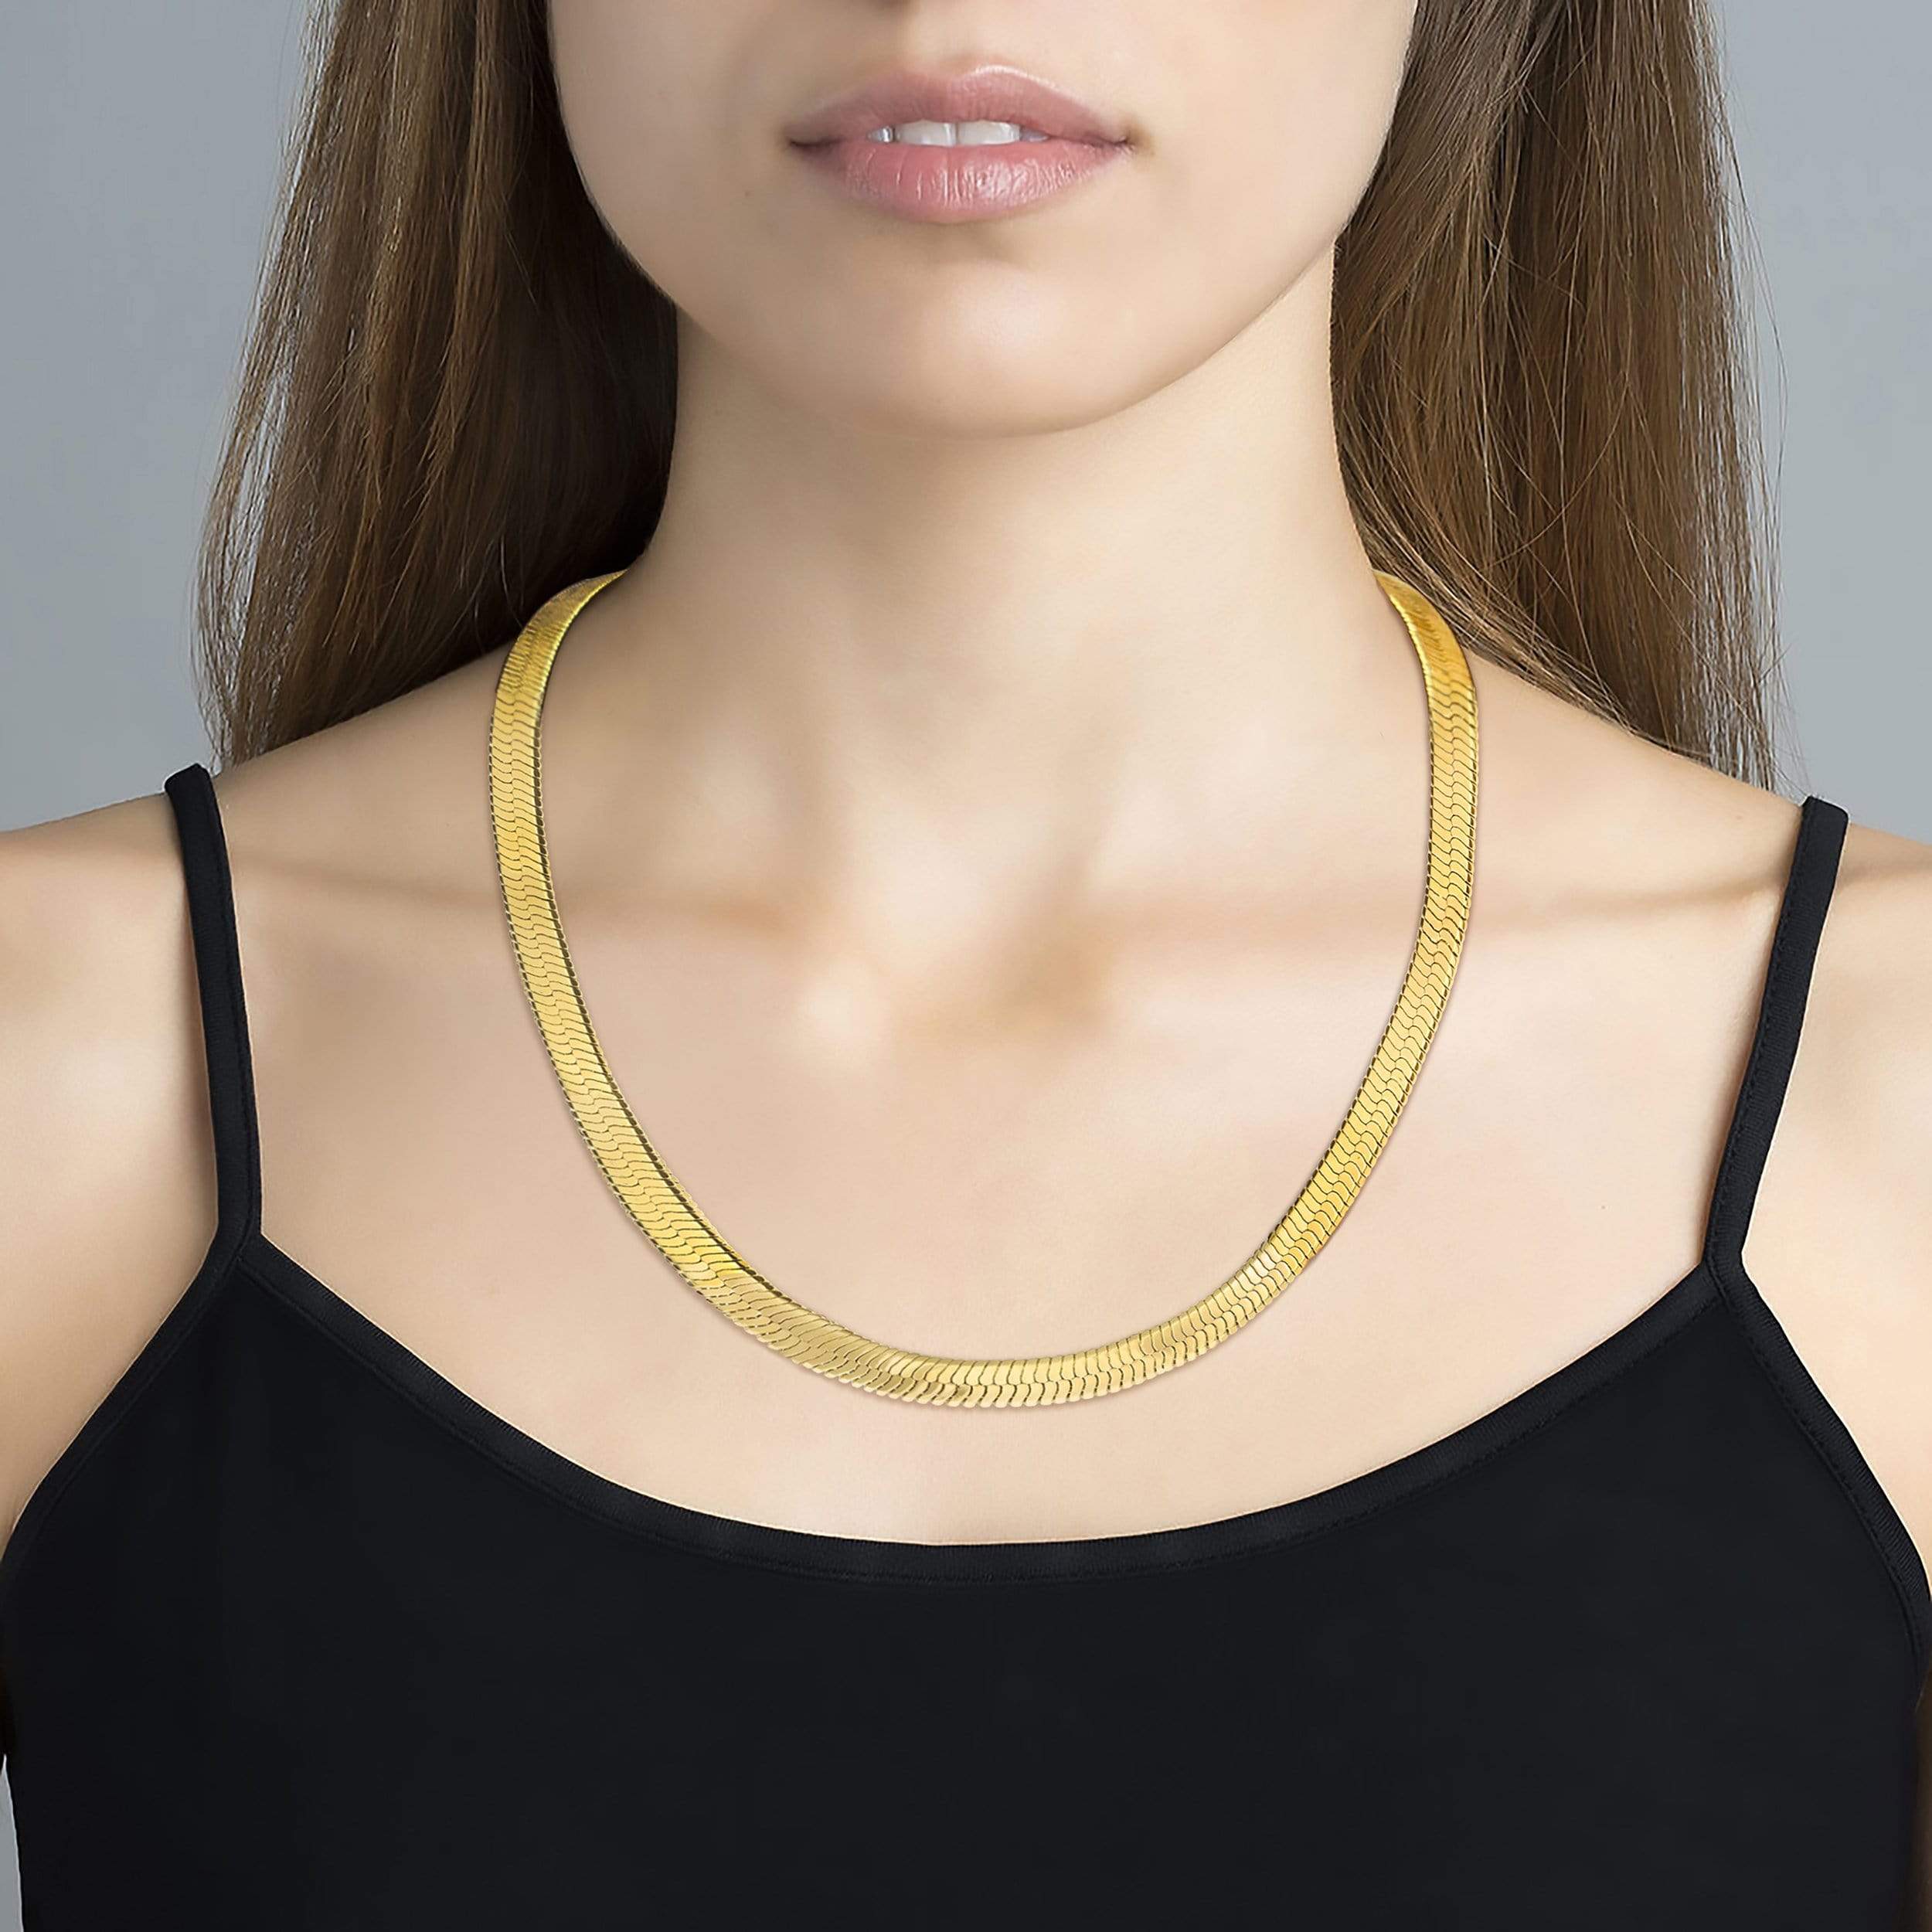 Lynora Jewellery Necklace 18" / Yellow Gold Plate Cobra Necklace Yellow Gold Plate